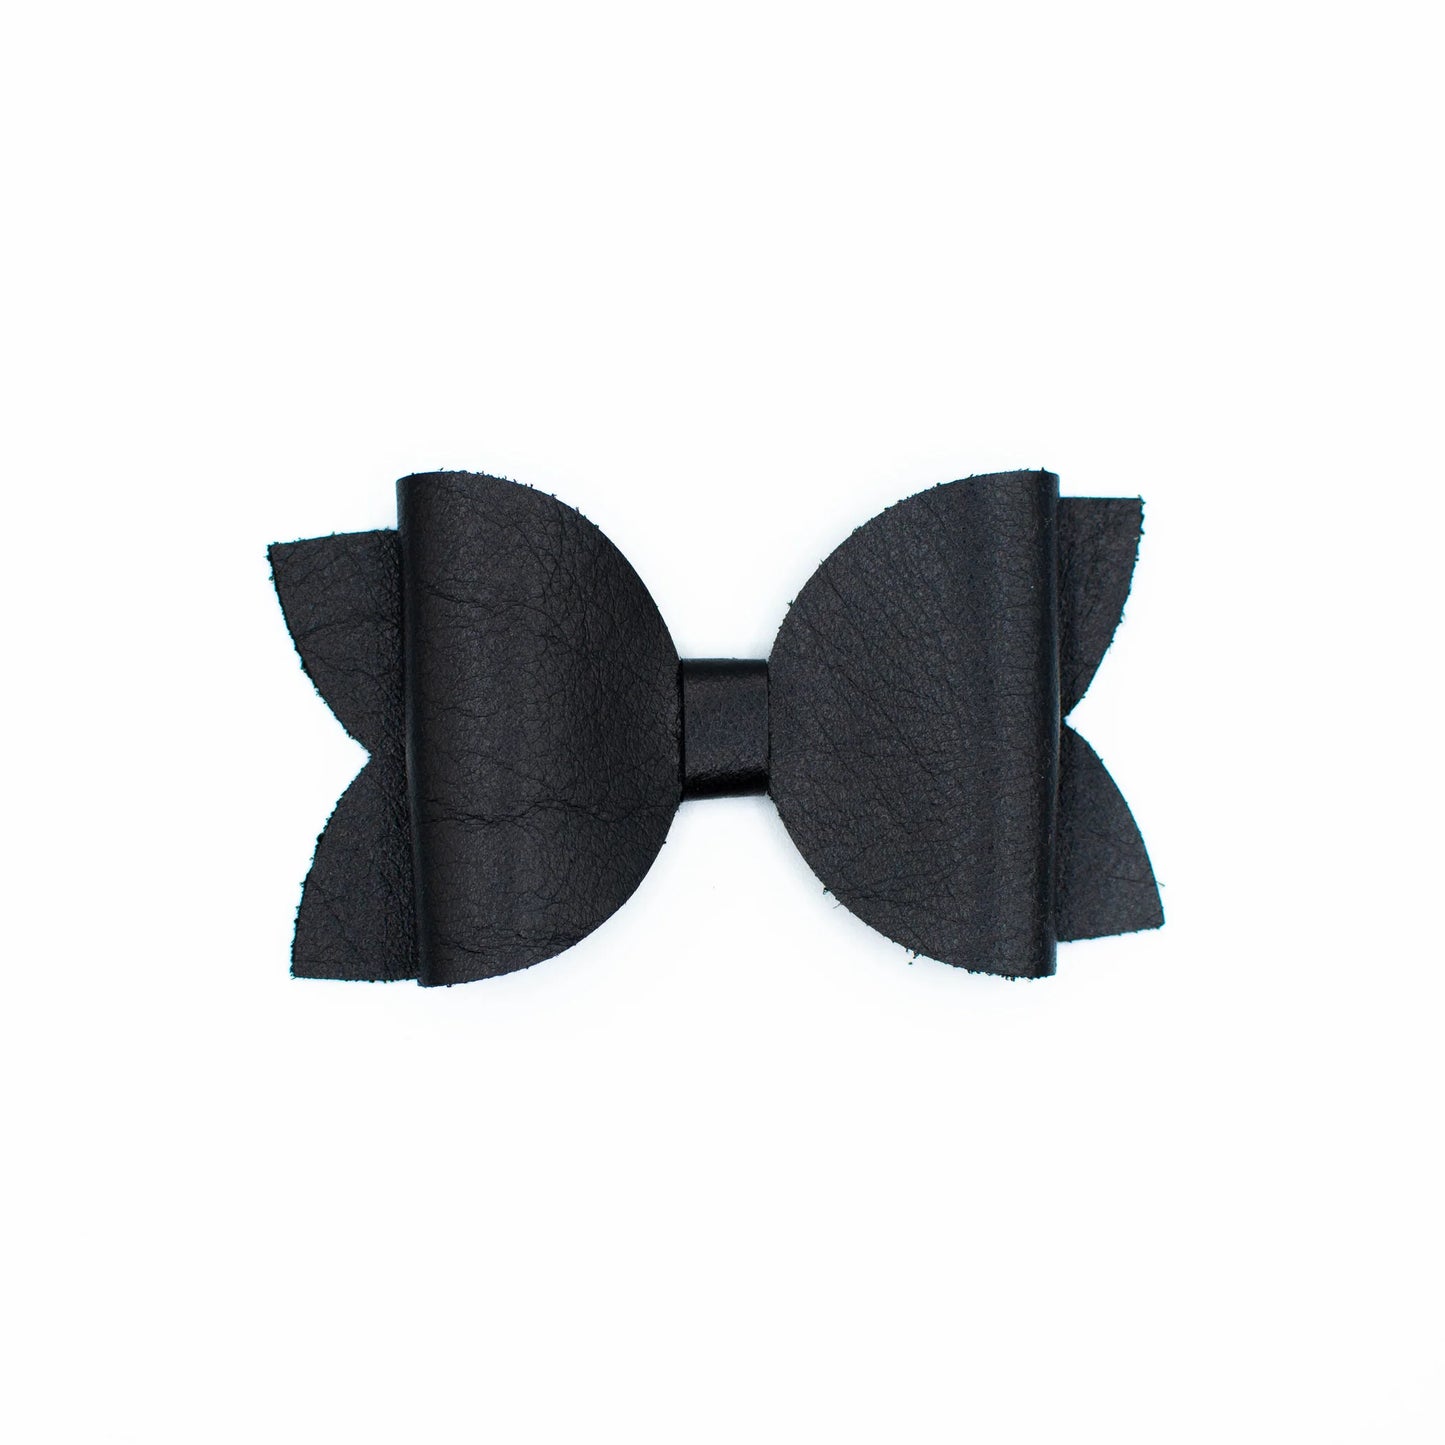 CLIP Lolo Bow Large